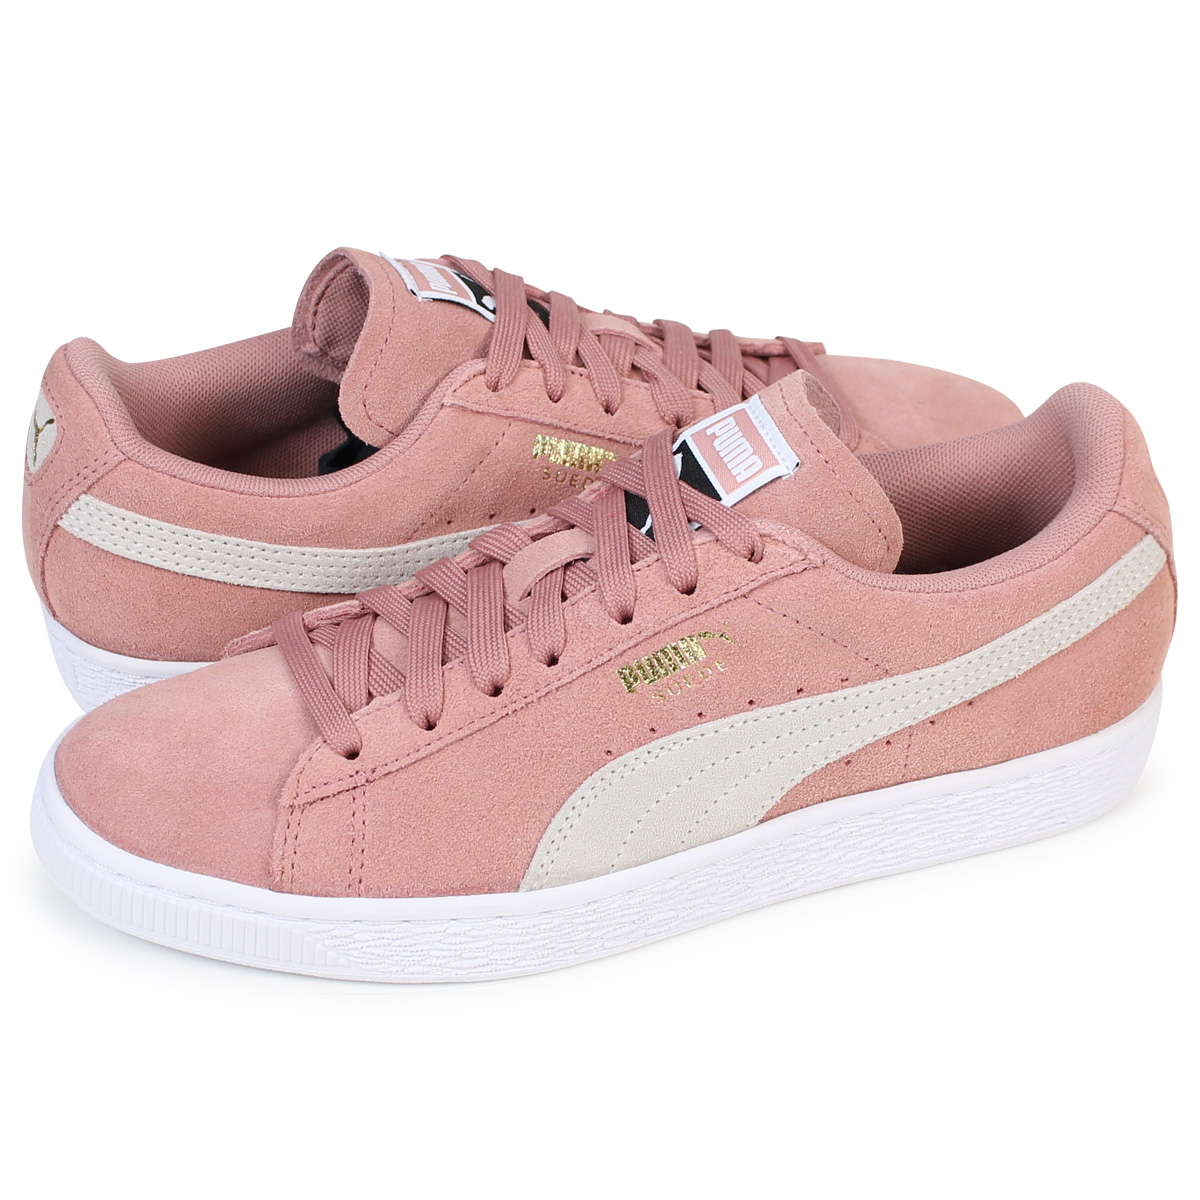 puma suede classic womens suede trainers light pink